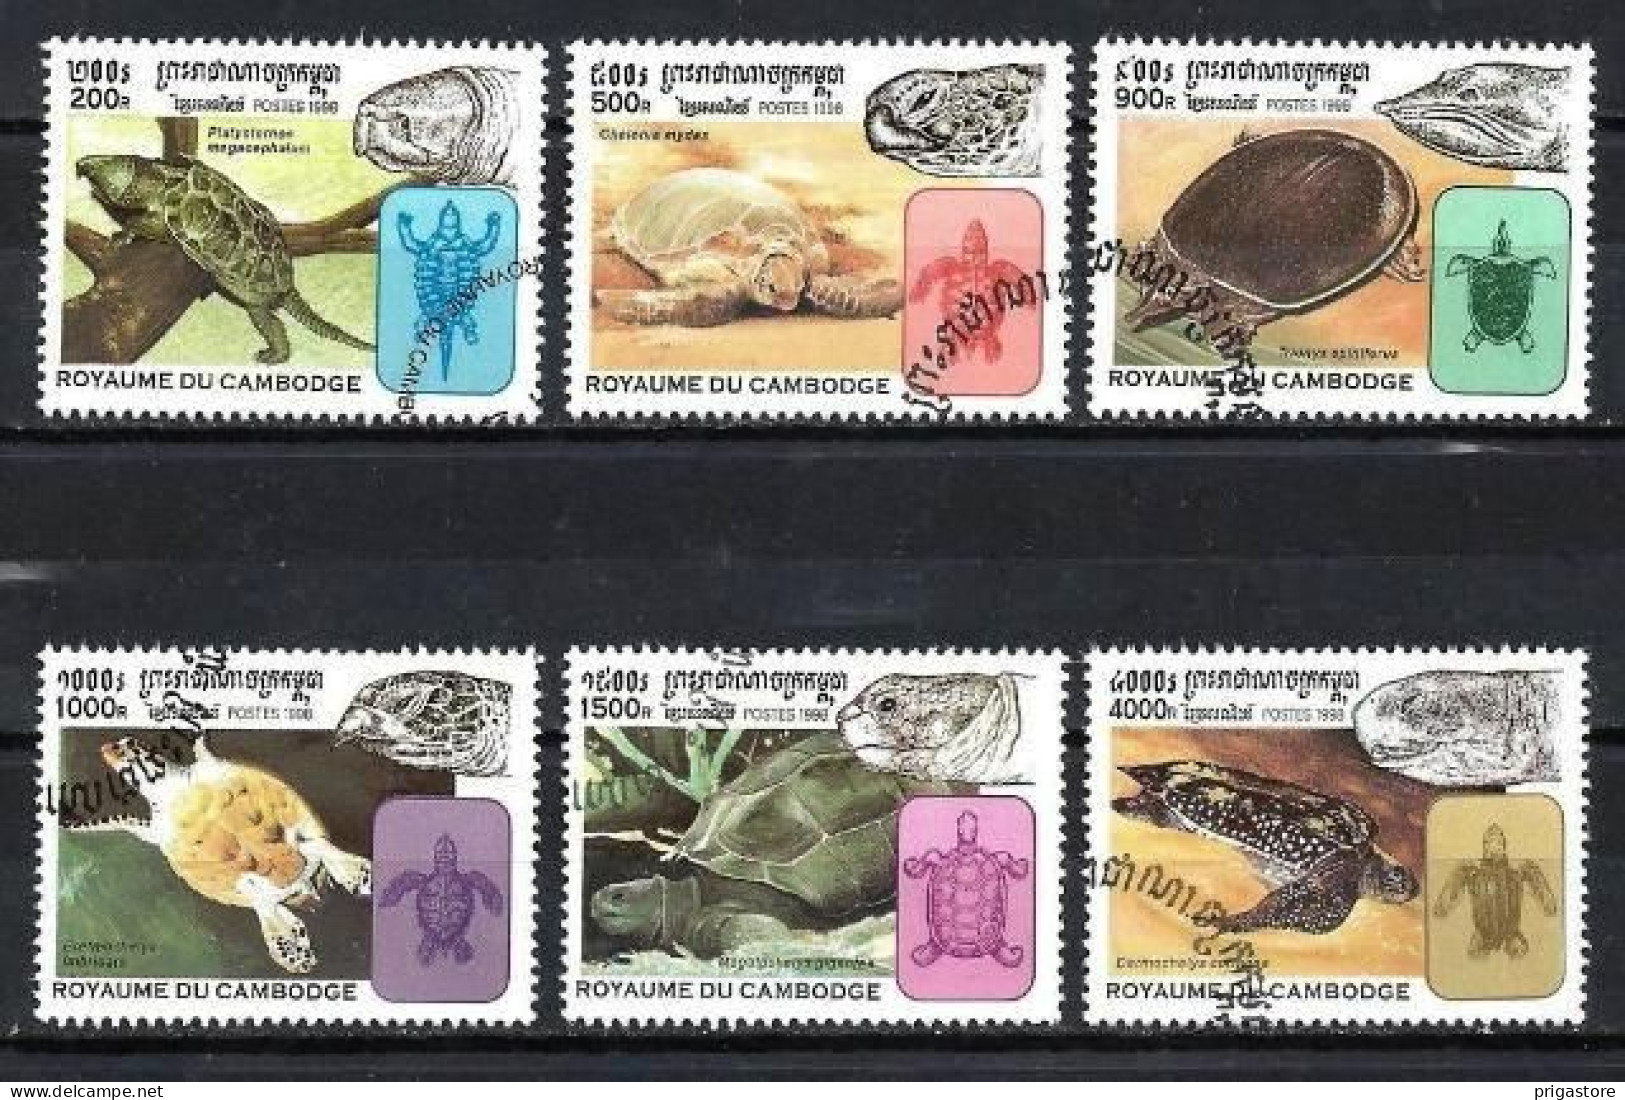 Animaux Tortues Cambodge 1998 (117)  Yvert N° 1556 à 1561 Oblitérés Used - Tortues